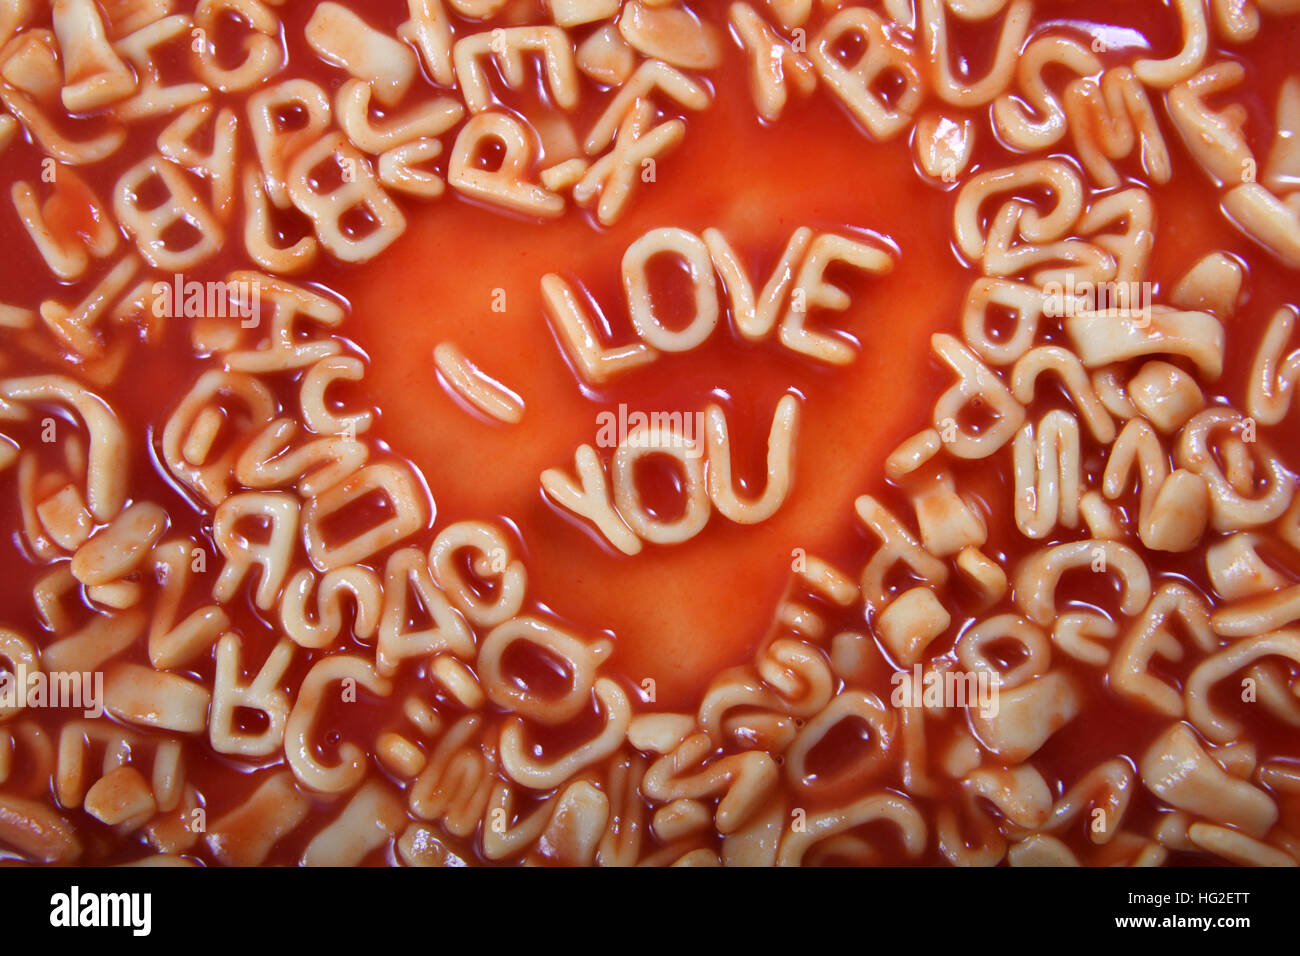 i Love you text written in Alphabetti Spaghetti pasta shaped letters, with tomato sauce around it. Stock Photo